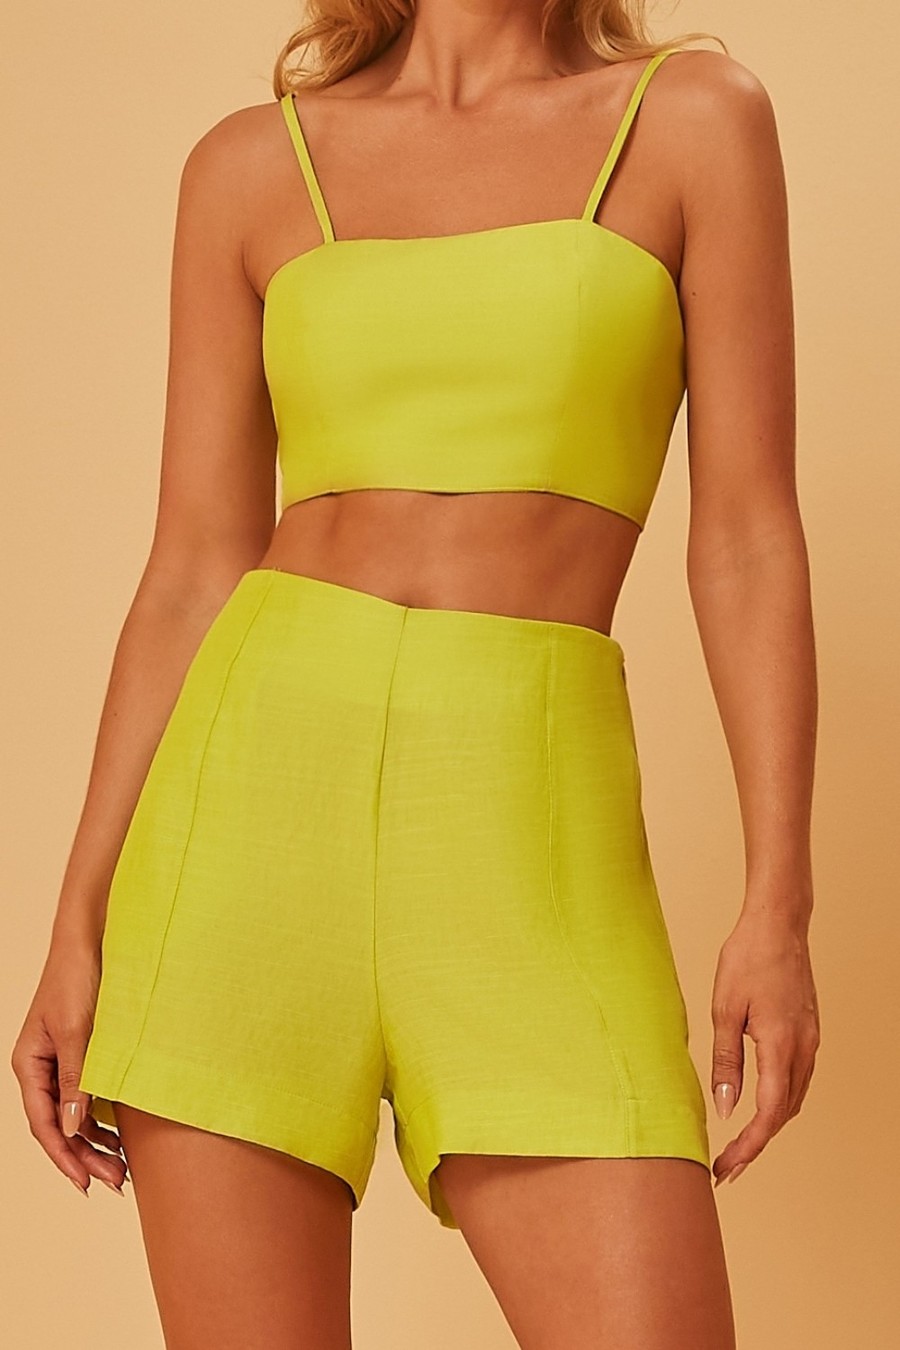 top cropped verde 6504700 r do sol